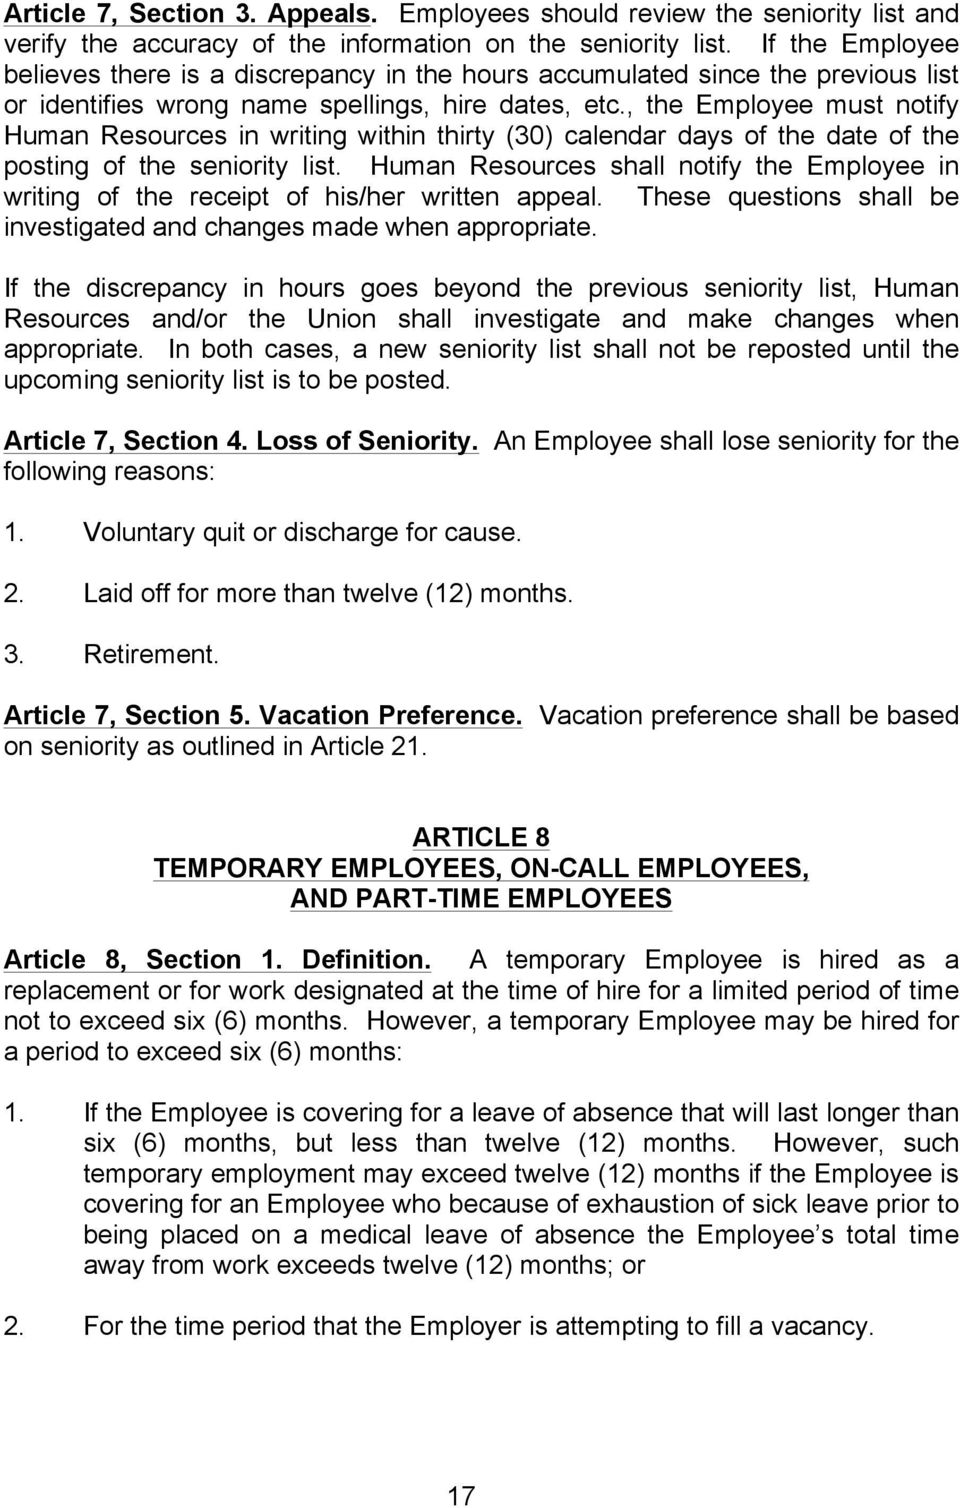 , the Employee must notify Human Resources in writing within thirty (30) calendar days of the date of the posting of the seniority list.